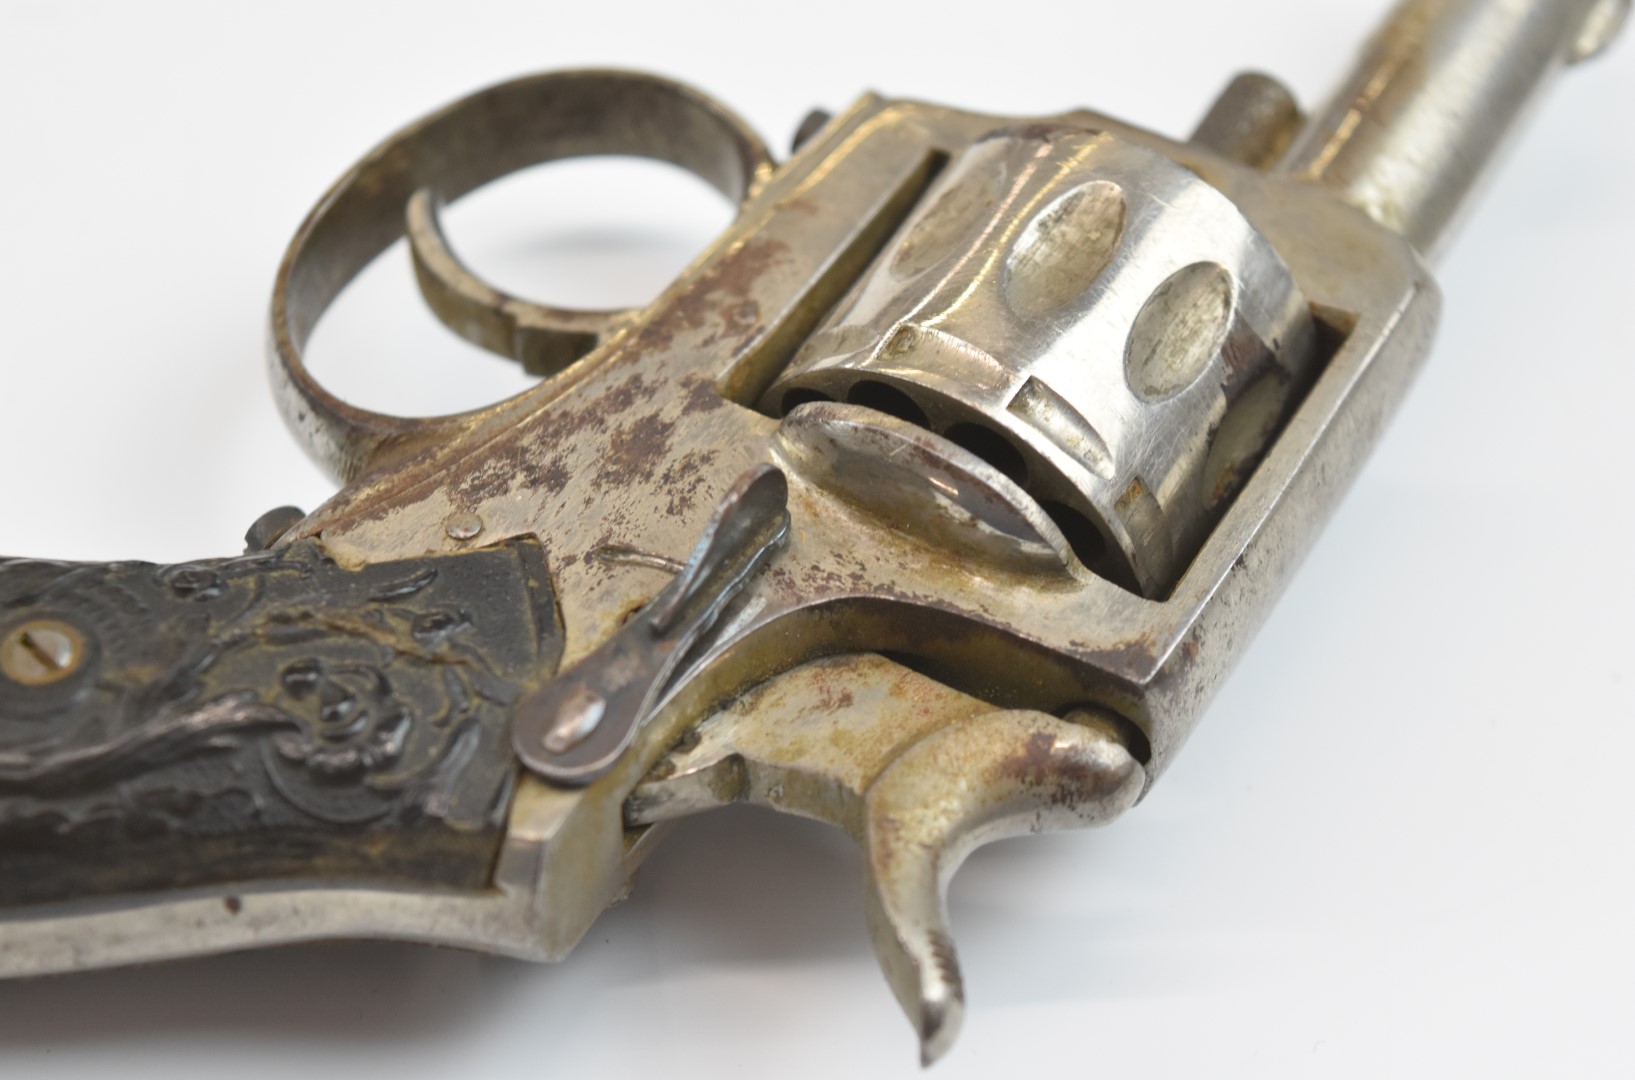 Unnamed ten-shot double action blank firing revolver or starting pistol with relief scenes of - Image 20 of 20